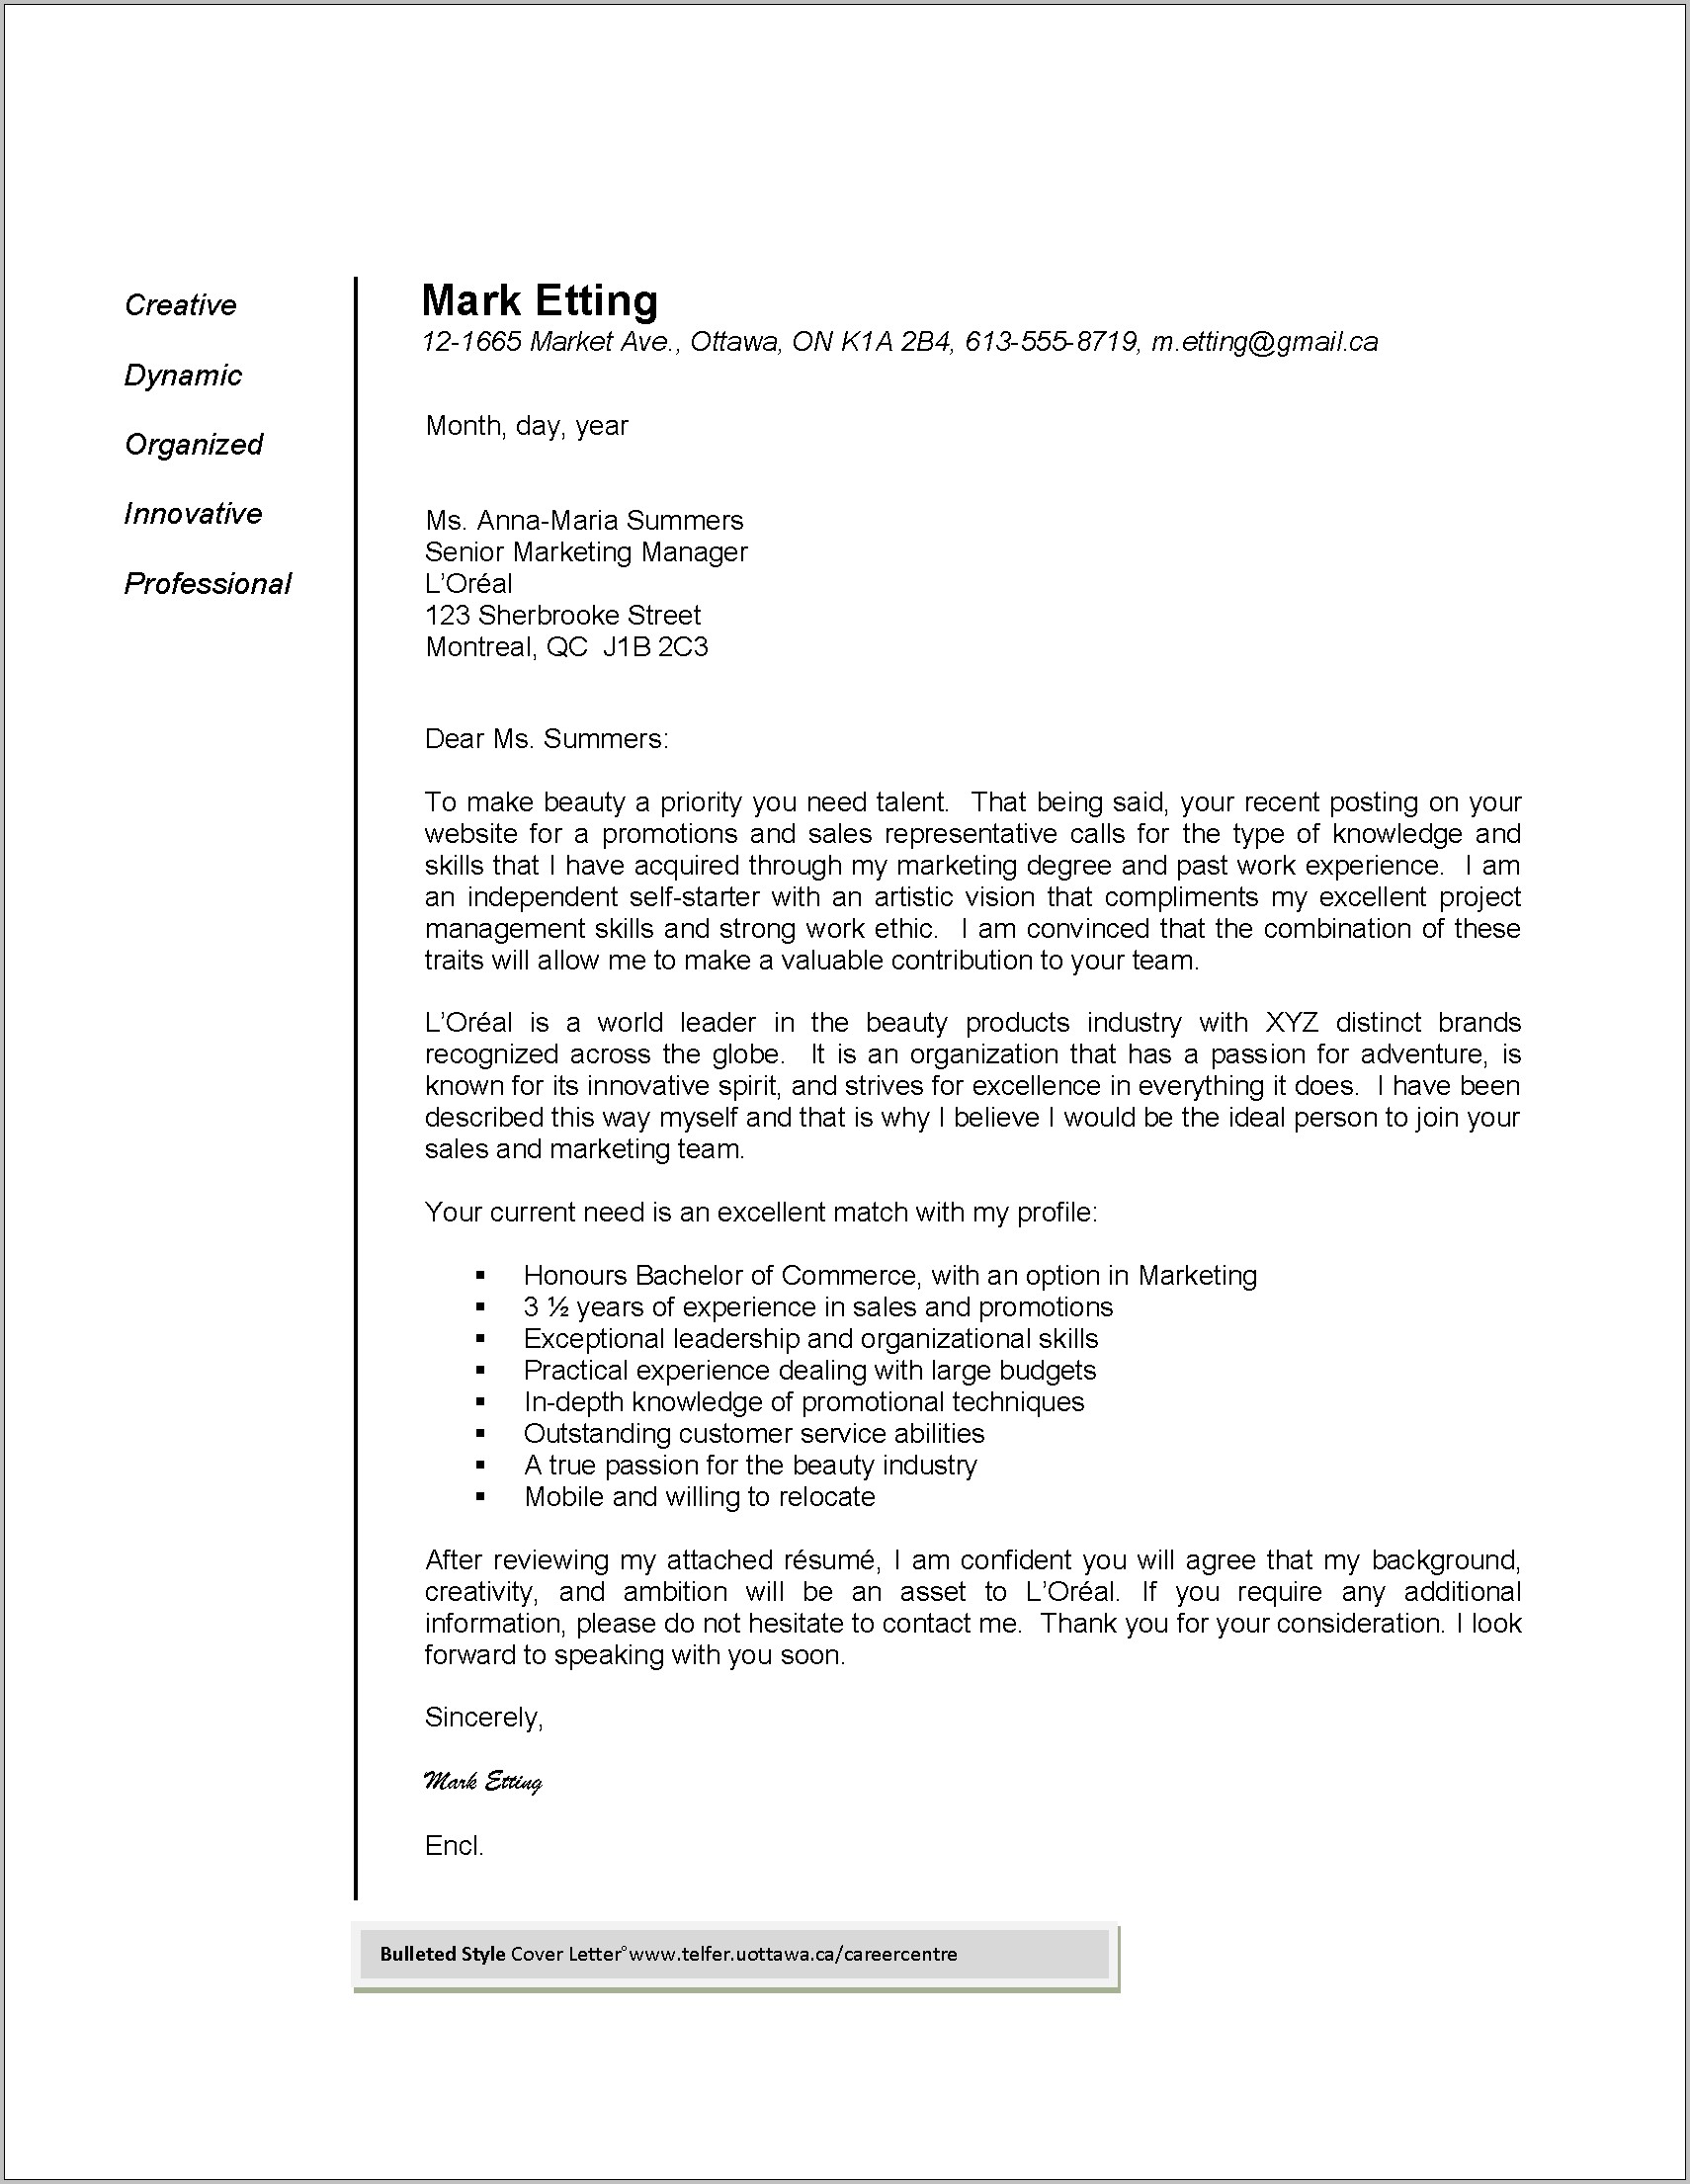 Free Administrative Assistant Resume Format